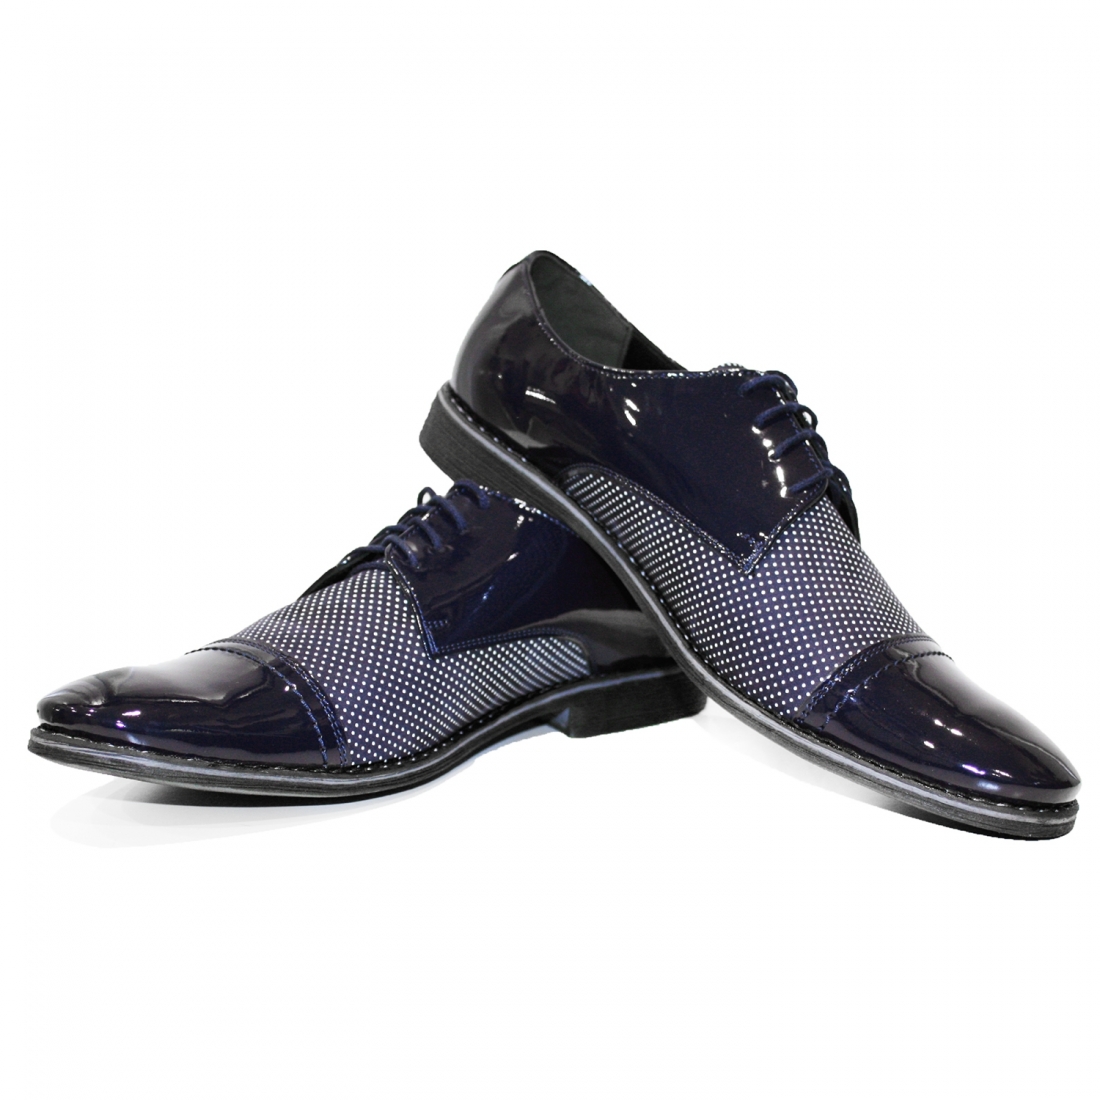 Modello Croppero - Classic Shoes - Handmade Colorful Italian Leather Shoes